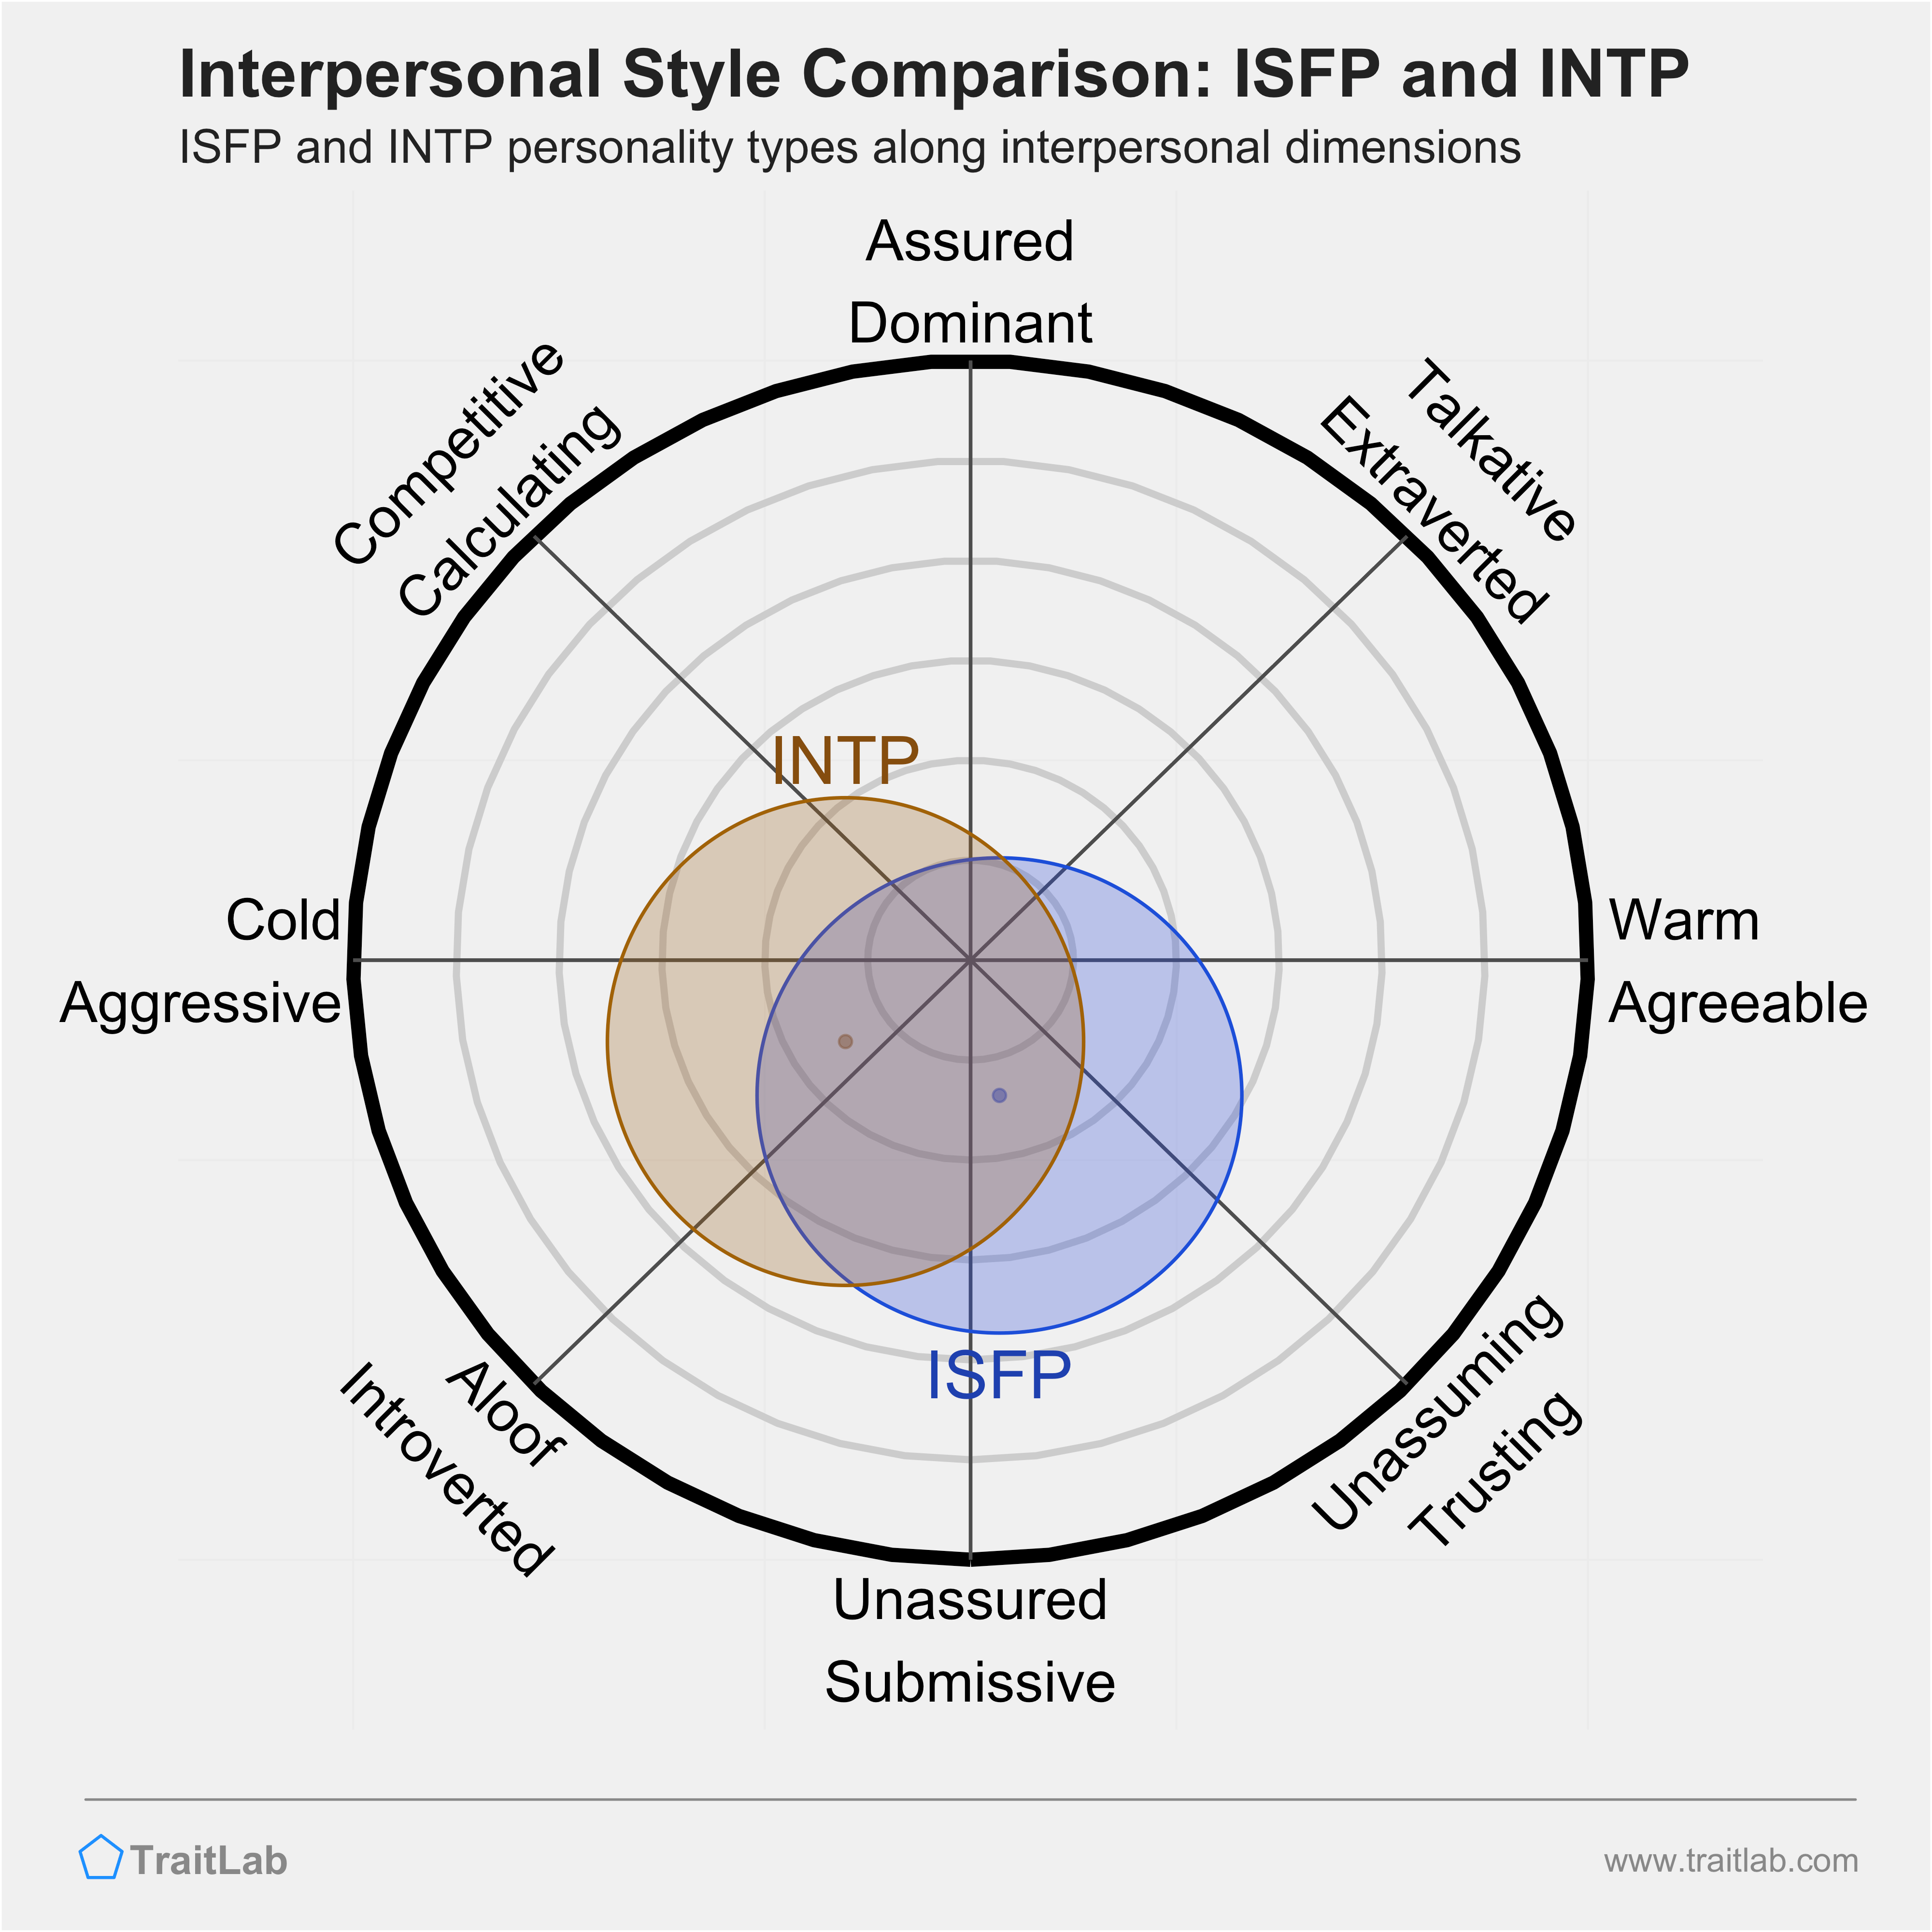 ISFP and INTP comparison across interpersonal dimensions